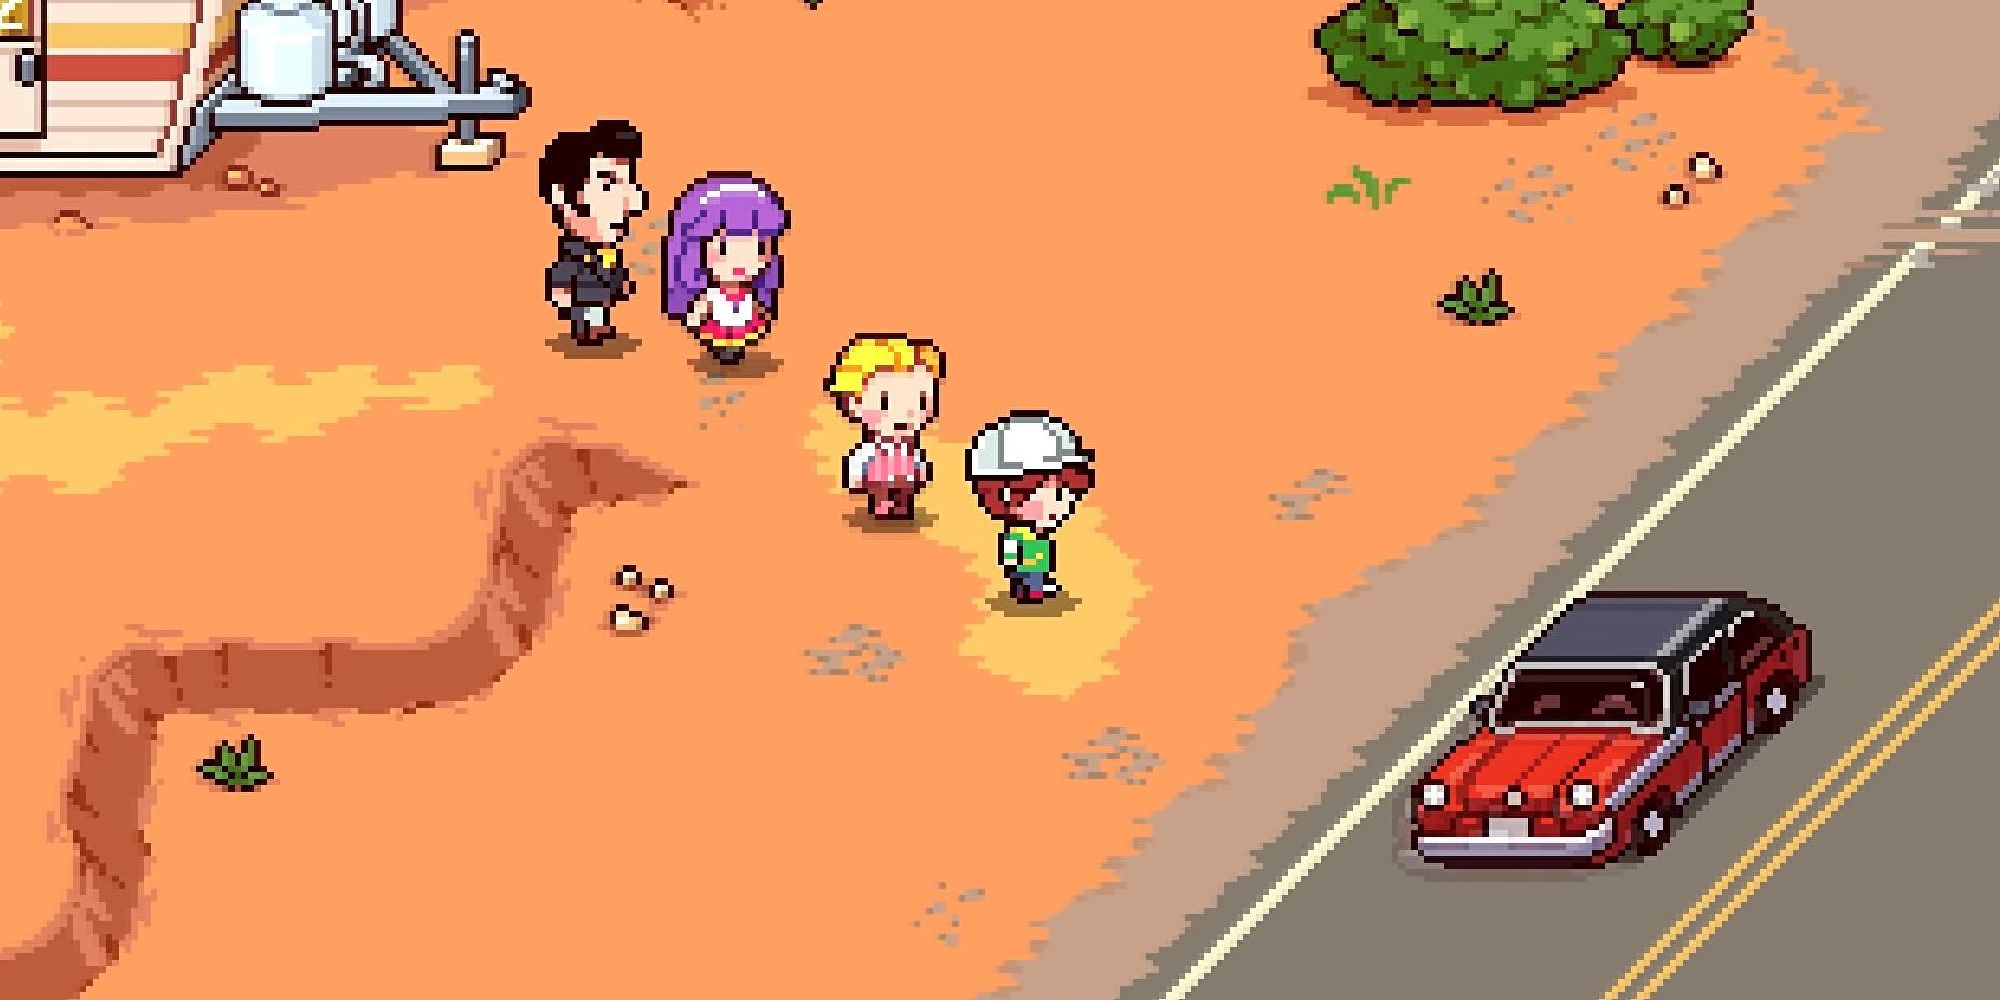 The overworld of Oddity, formerly Mother 4, showing the characters near a roadside